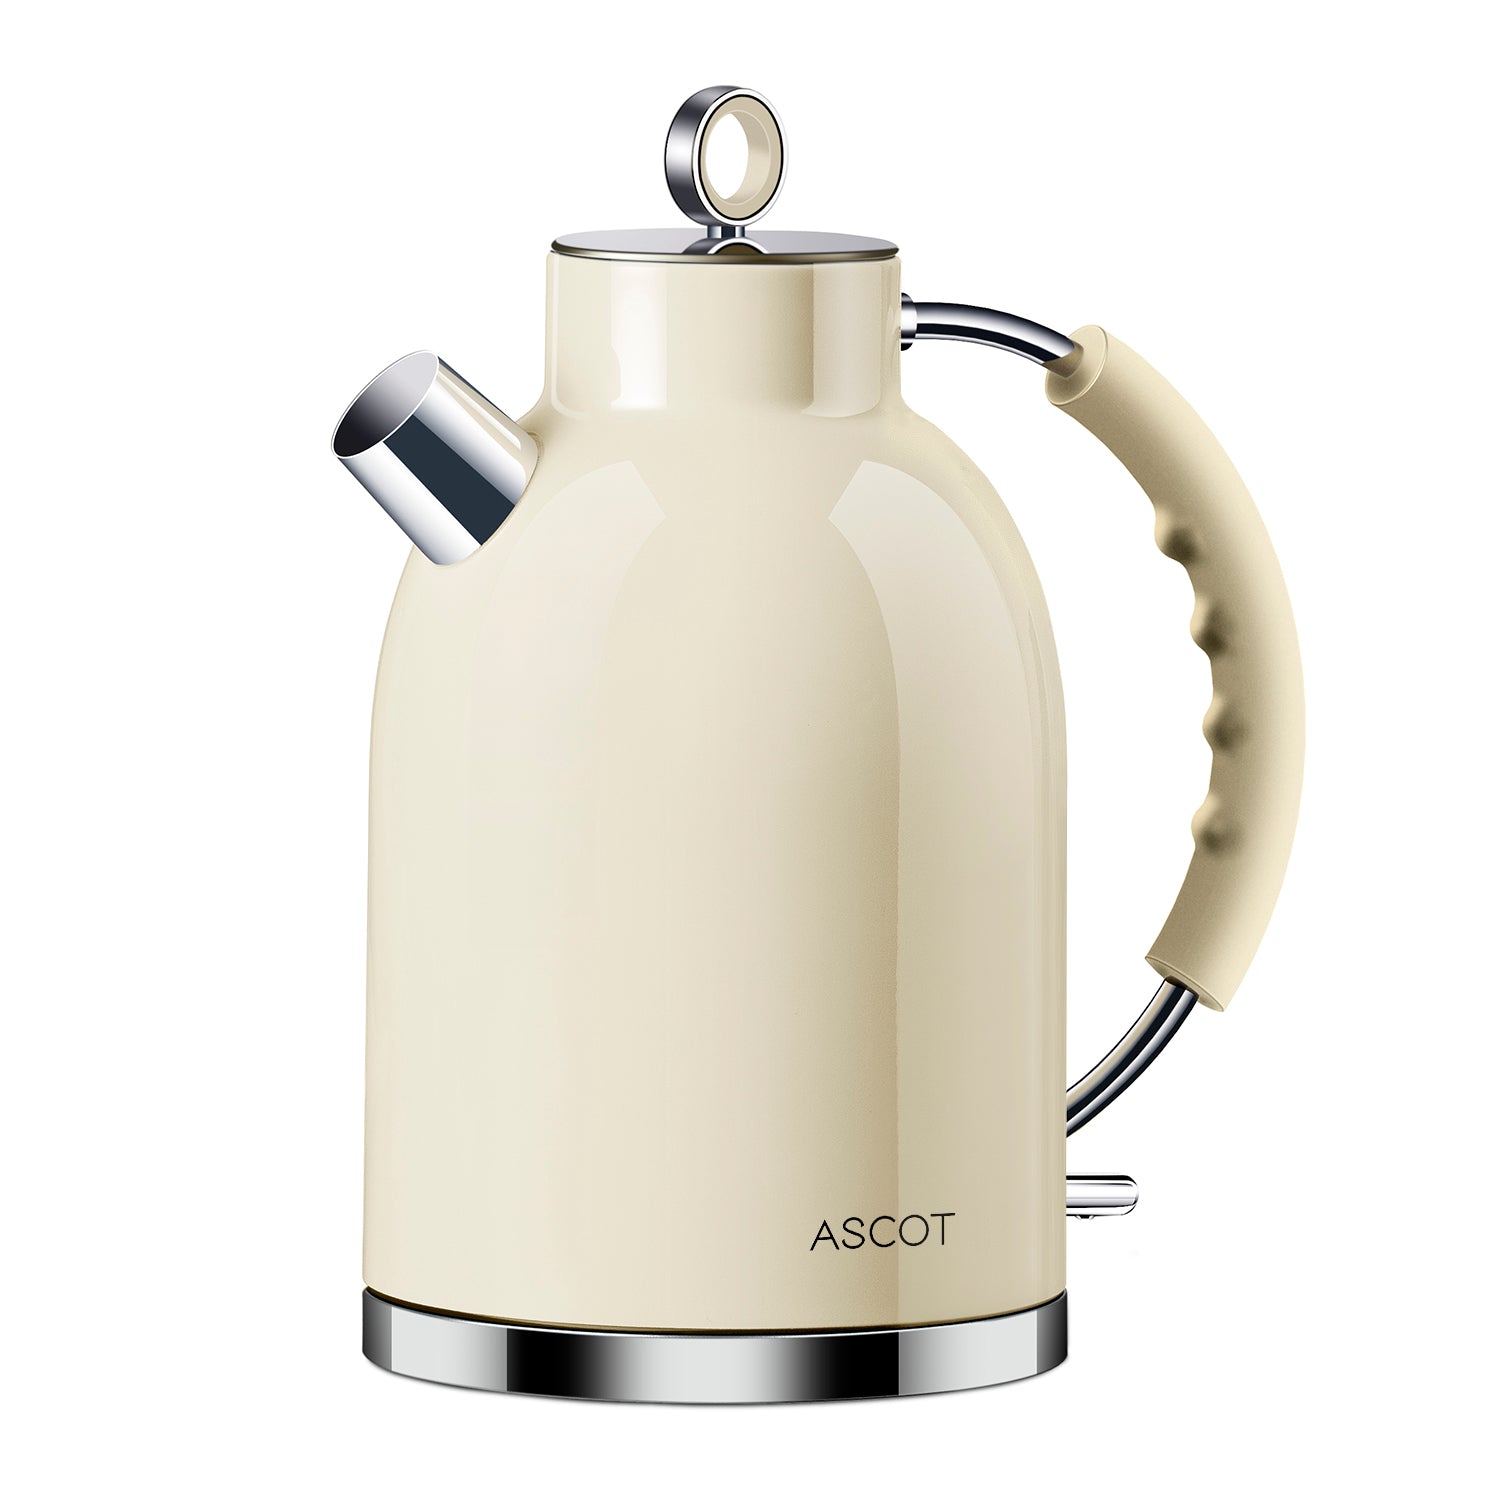 Retro Electric Kettle 304 Stainless Steel Household Appliances 1.5